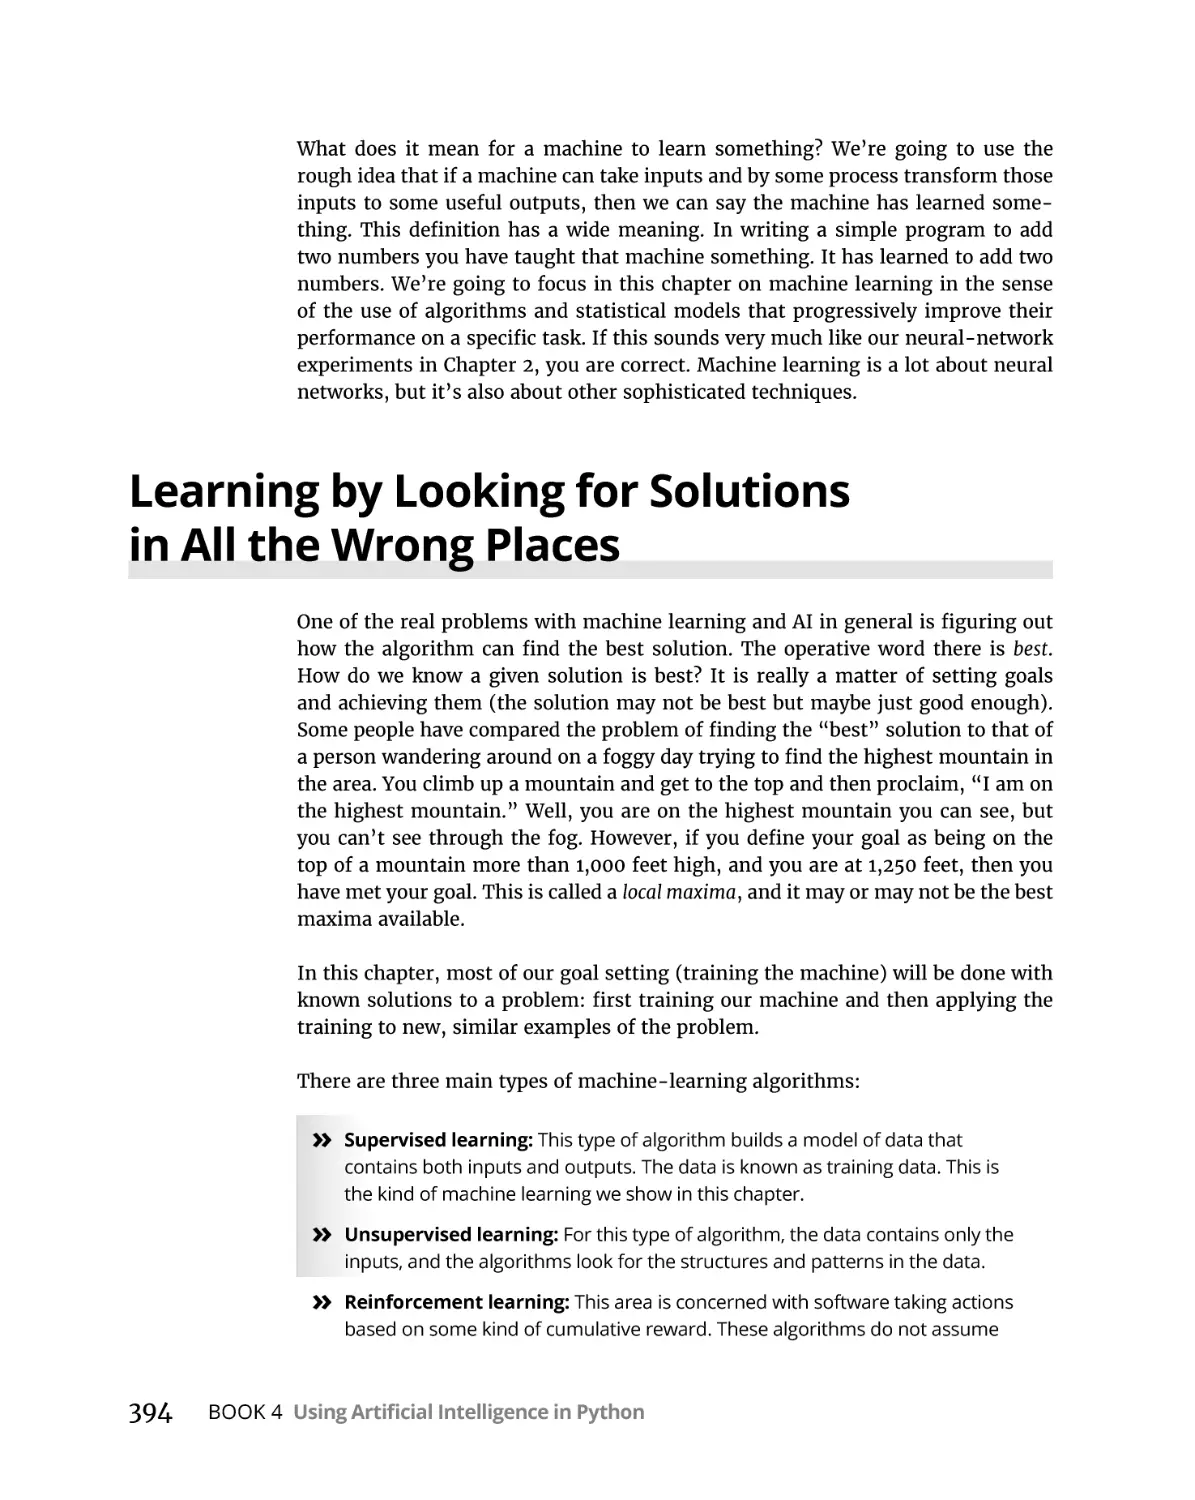 Learning by Looking for Solutions in All the Wrong Places